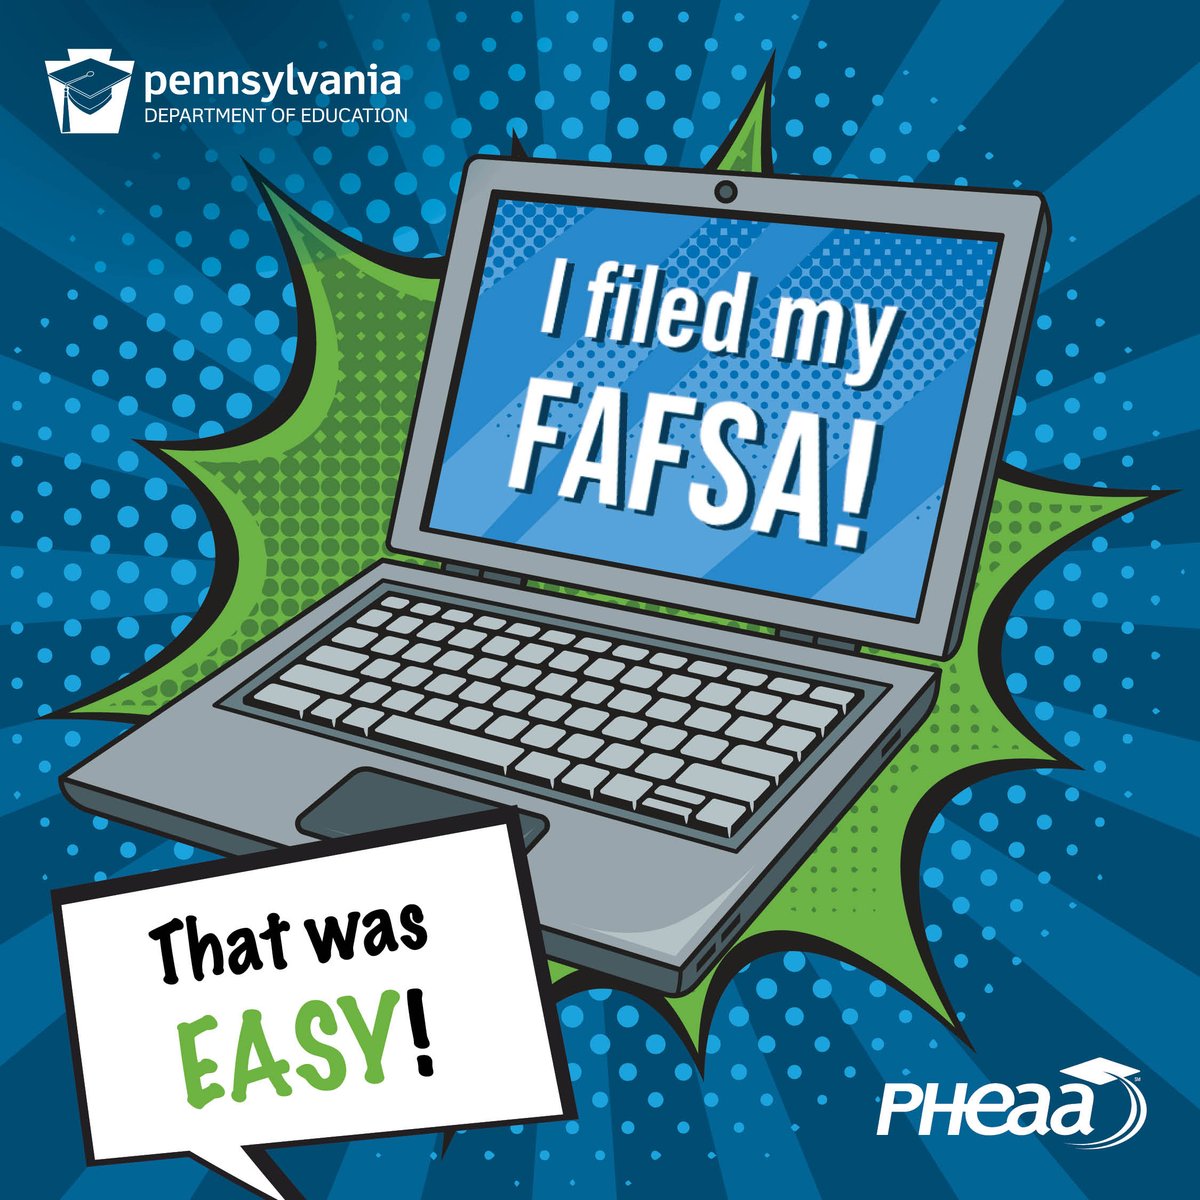 Looking for ways to pay for college but haven’t filled out your FAFSA? Whatever your situation, the FAFSA unlocks aid on the federal, state and institutional levels. Visit FAFSA.gov now to see what's available! The deadline was recently extended to June 1.